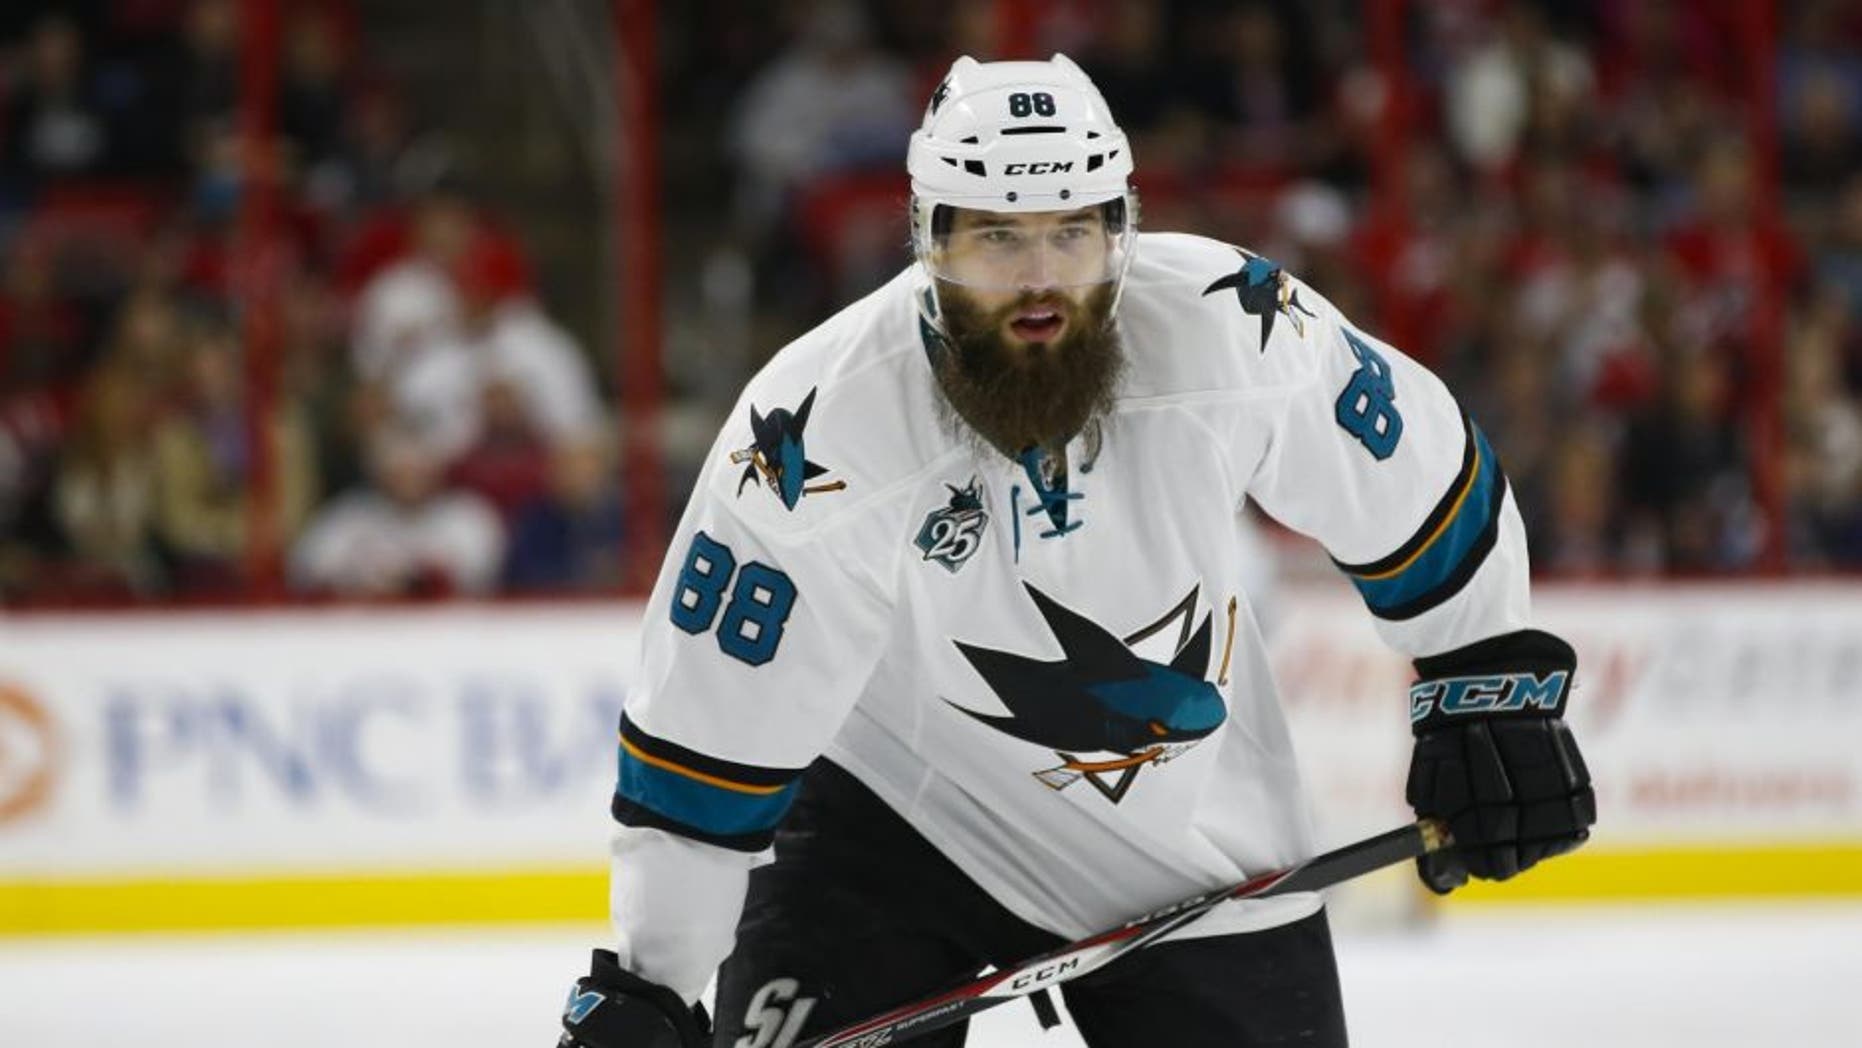 Brent Burns' beard to be immortalized with Chia head giveaway Fox News